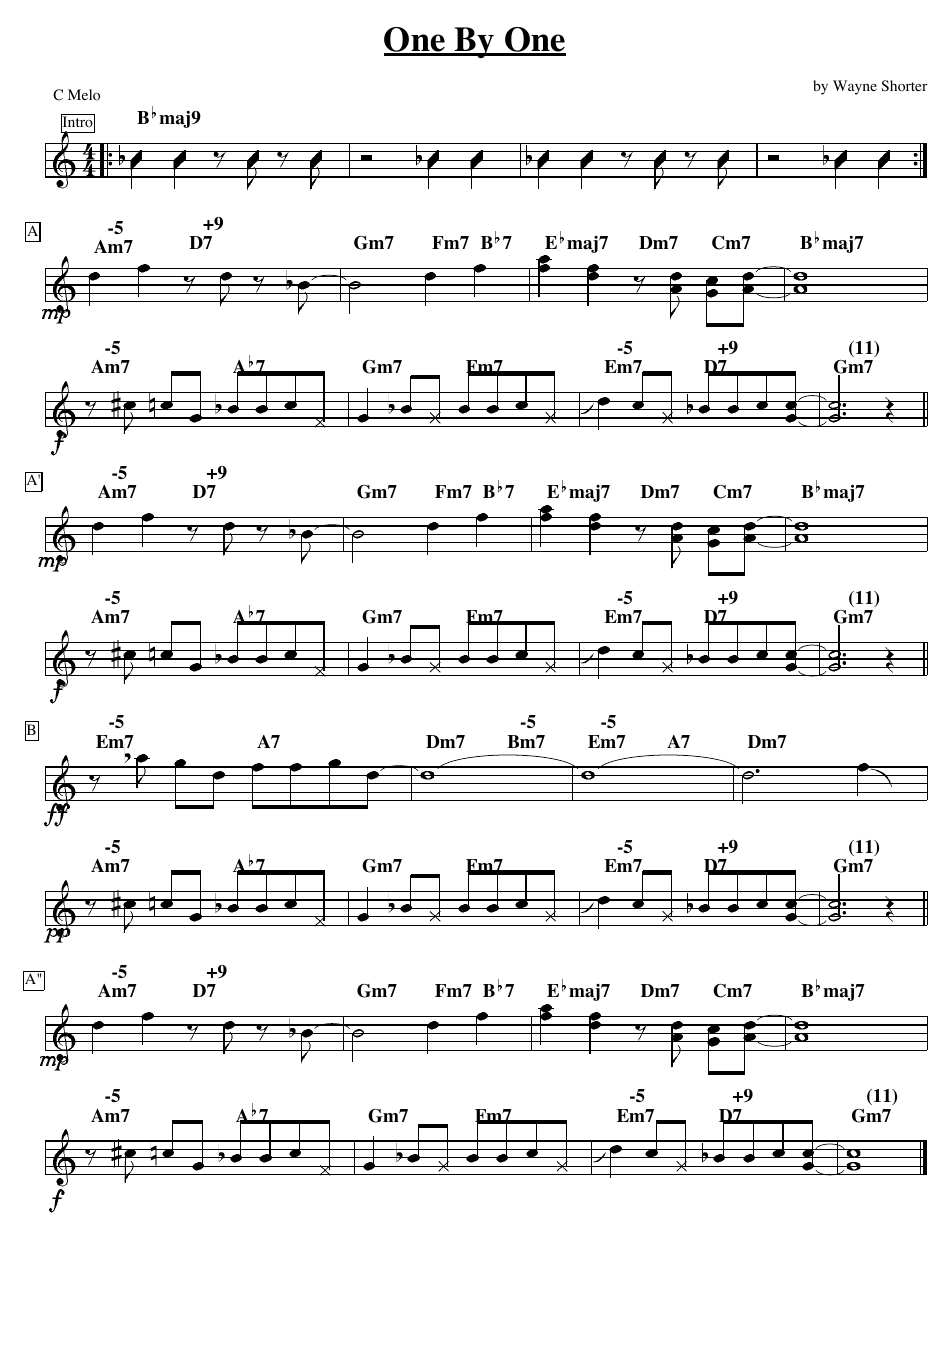 Wayne Shorter - One by One Sheet Music Preview